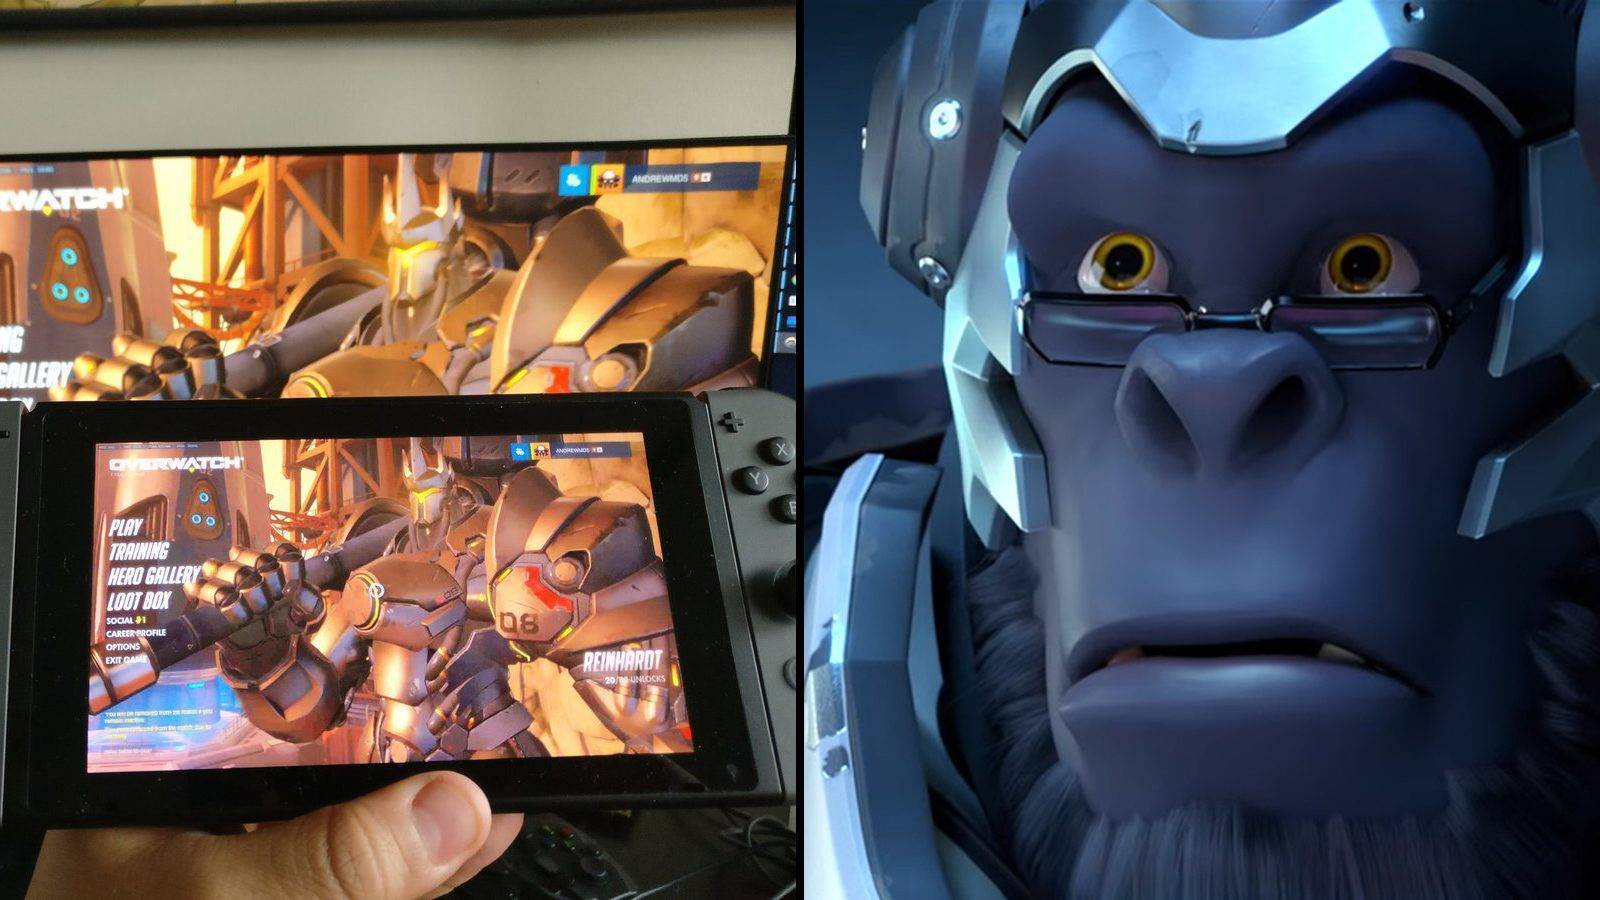 free download overwatch 2 switch